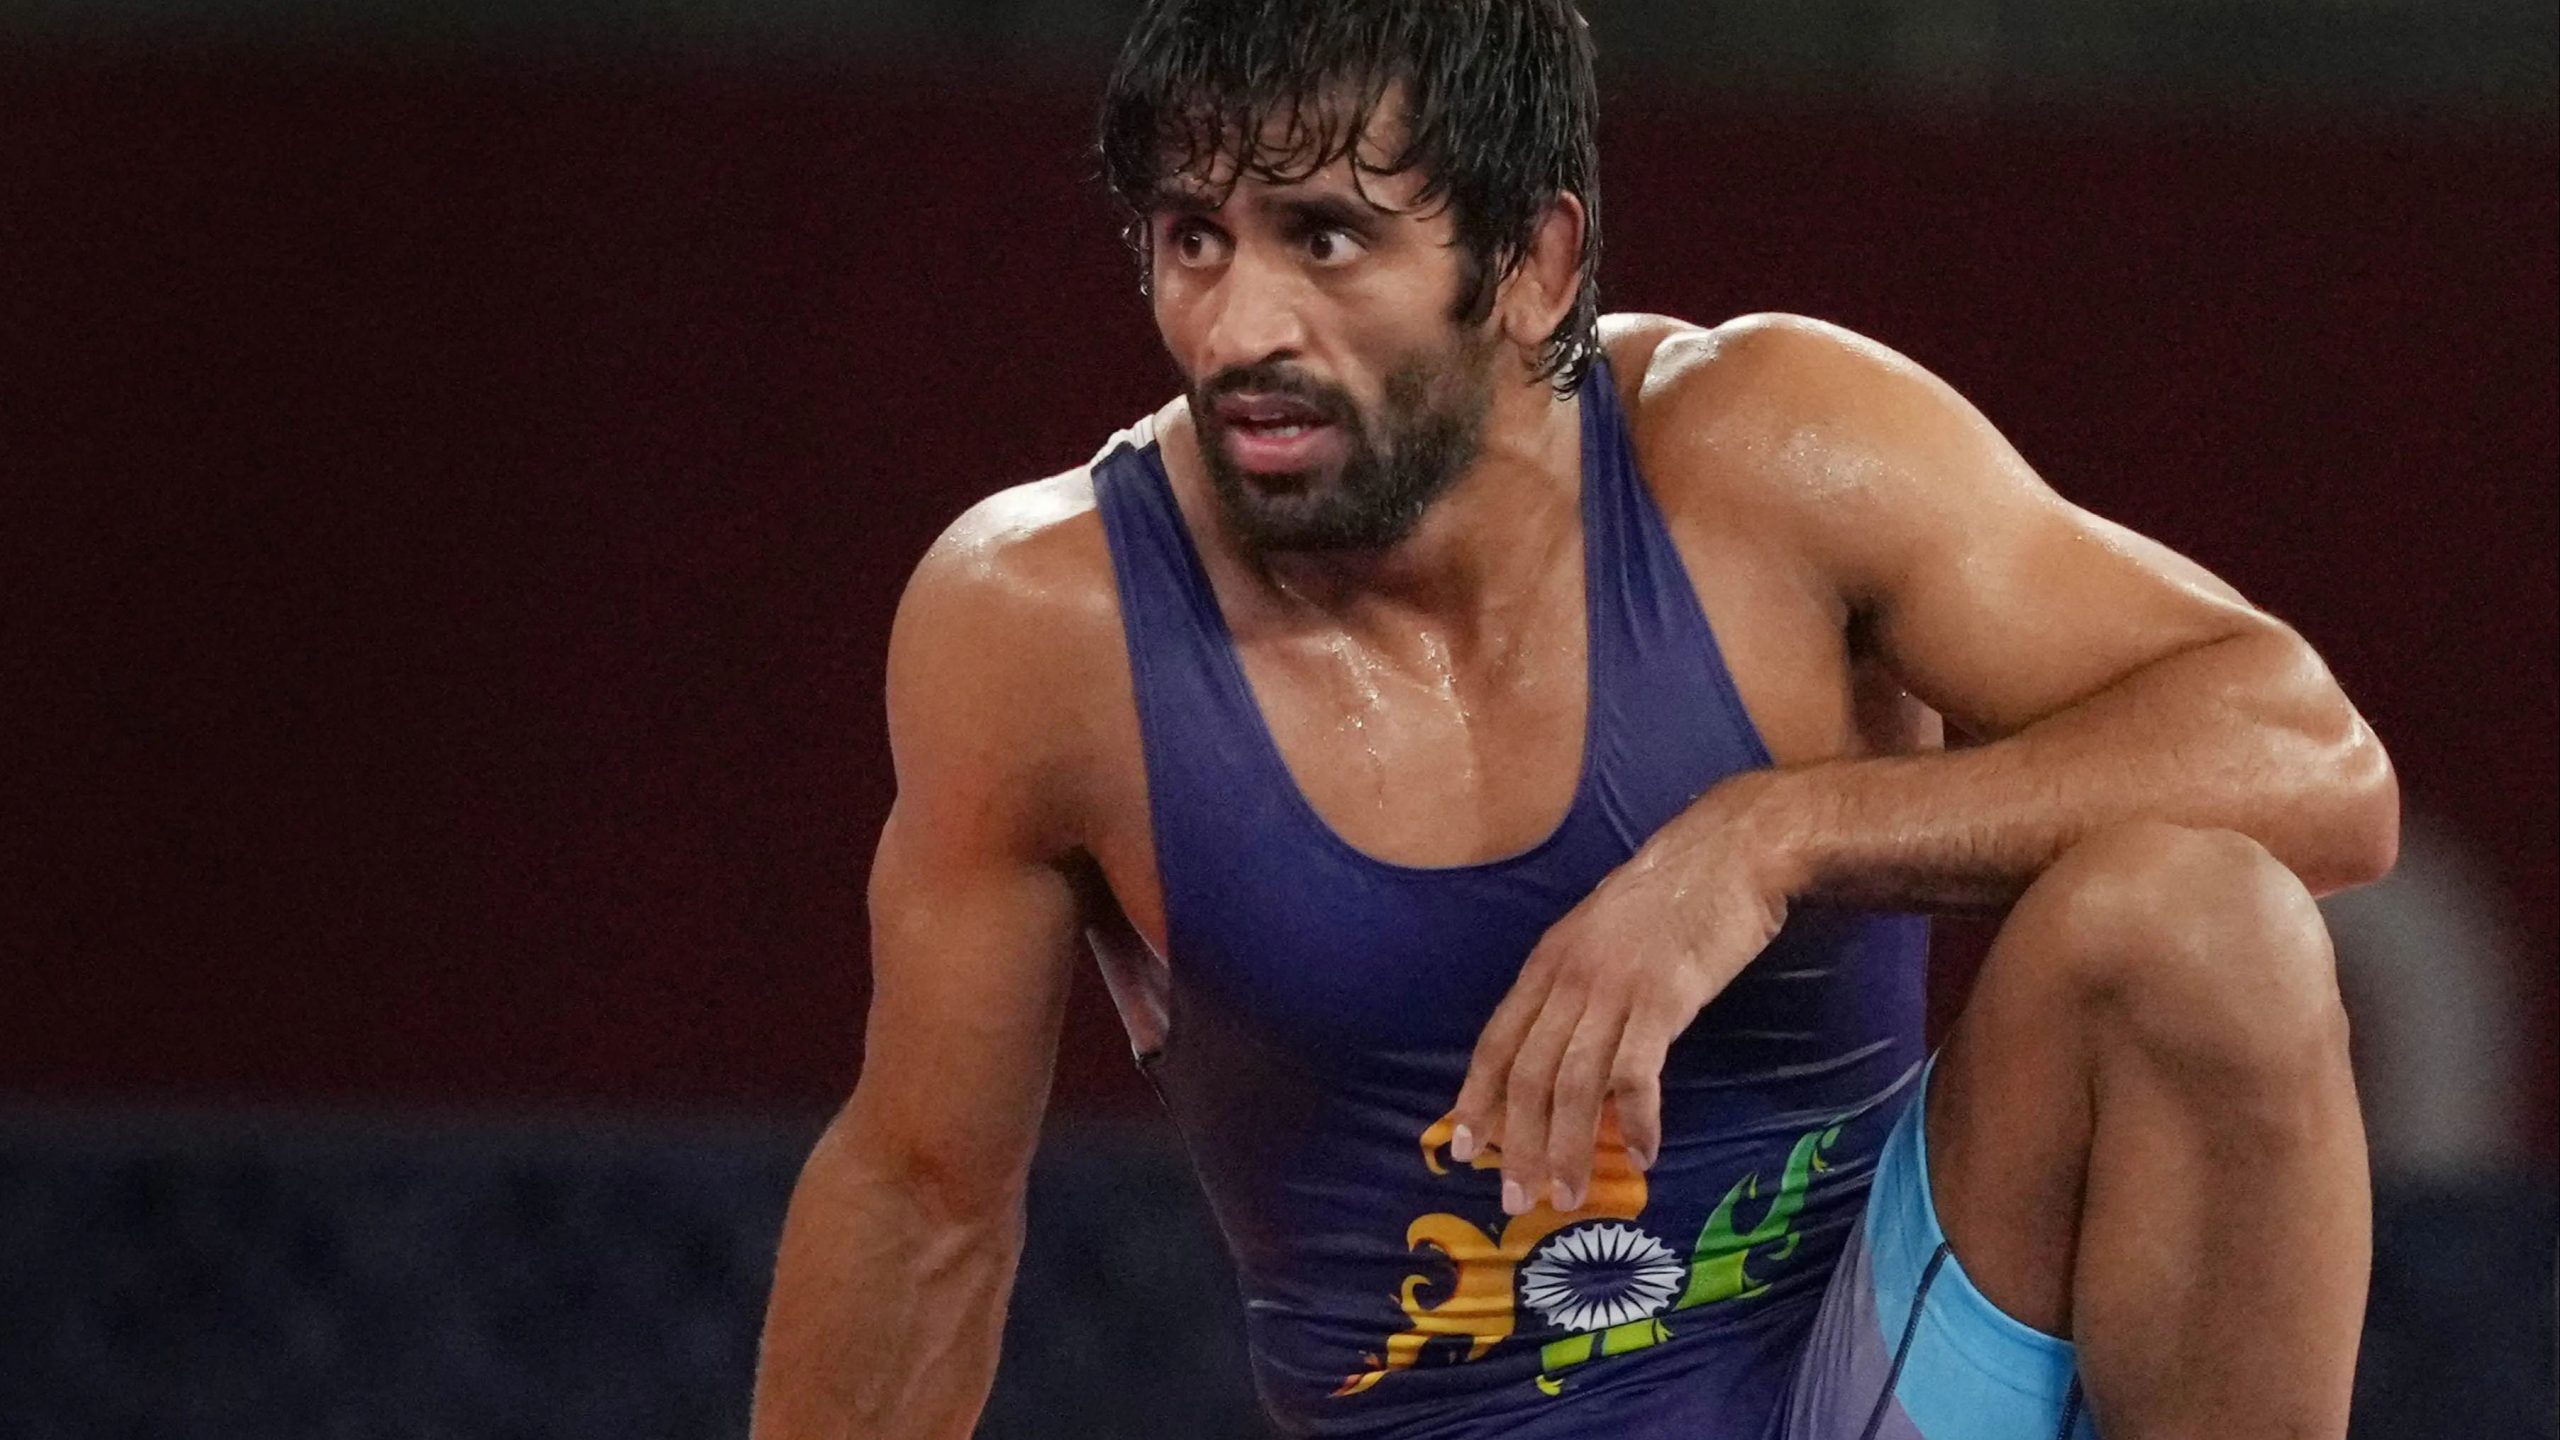 Tokyo Olympics: Bajrang Punia takes home the bronze medal in wrestling